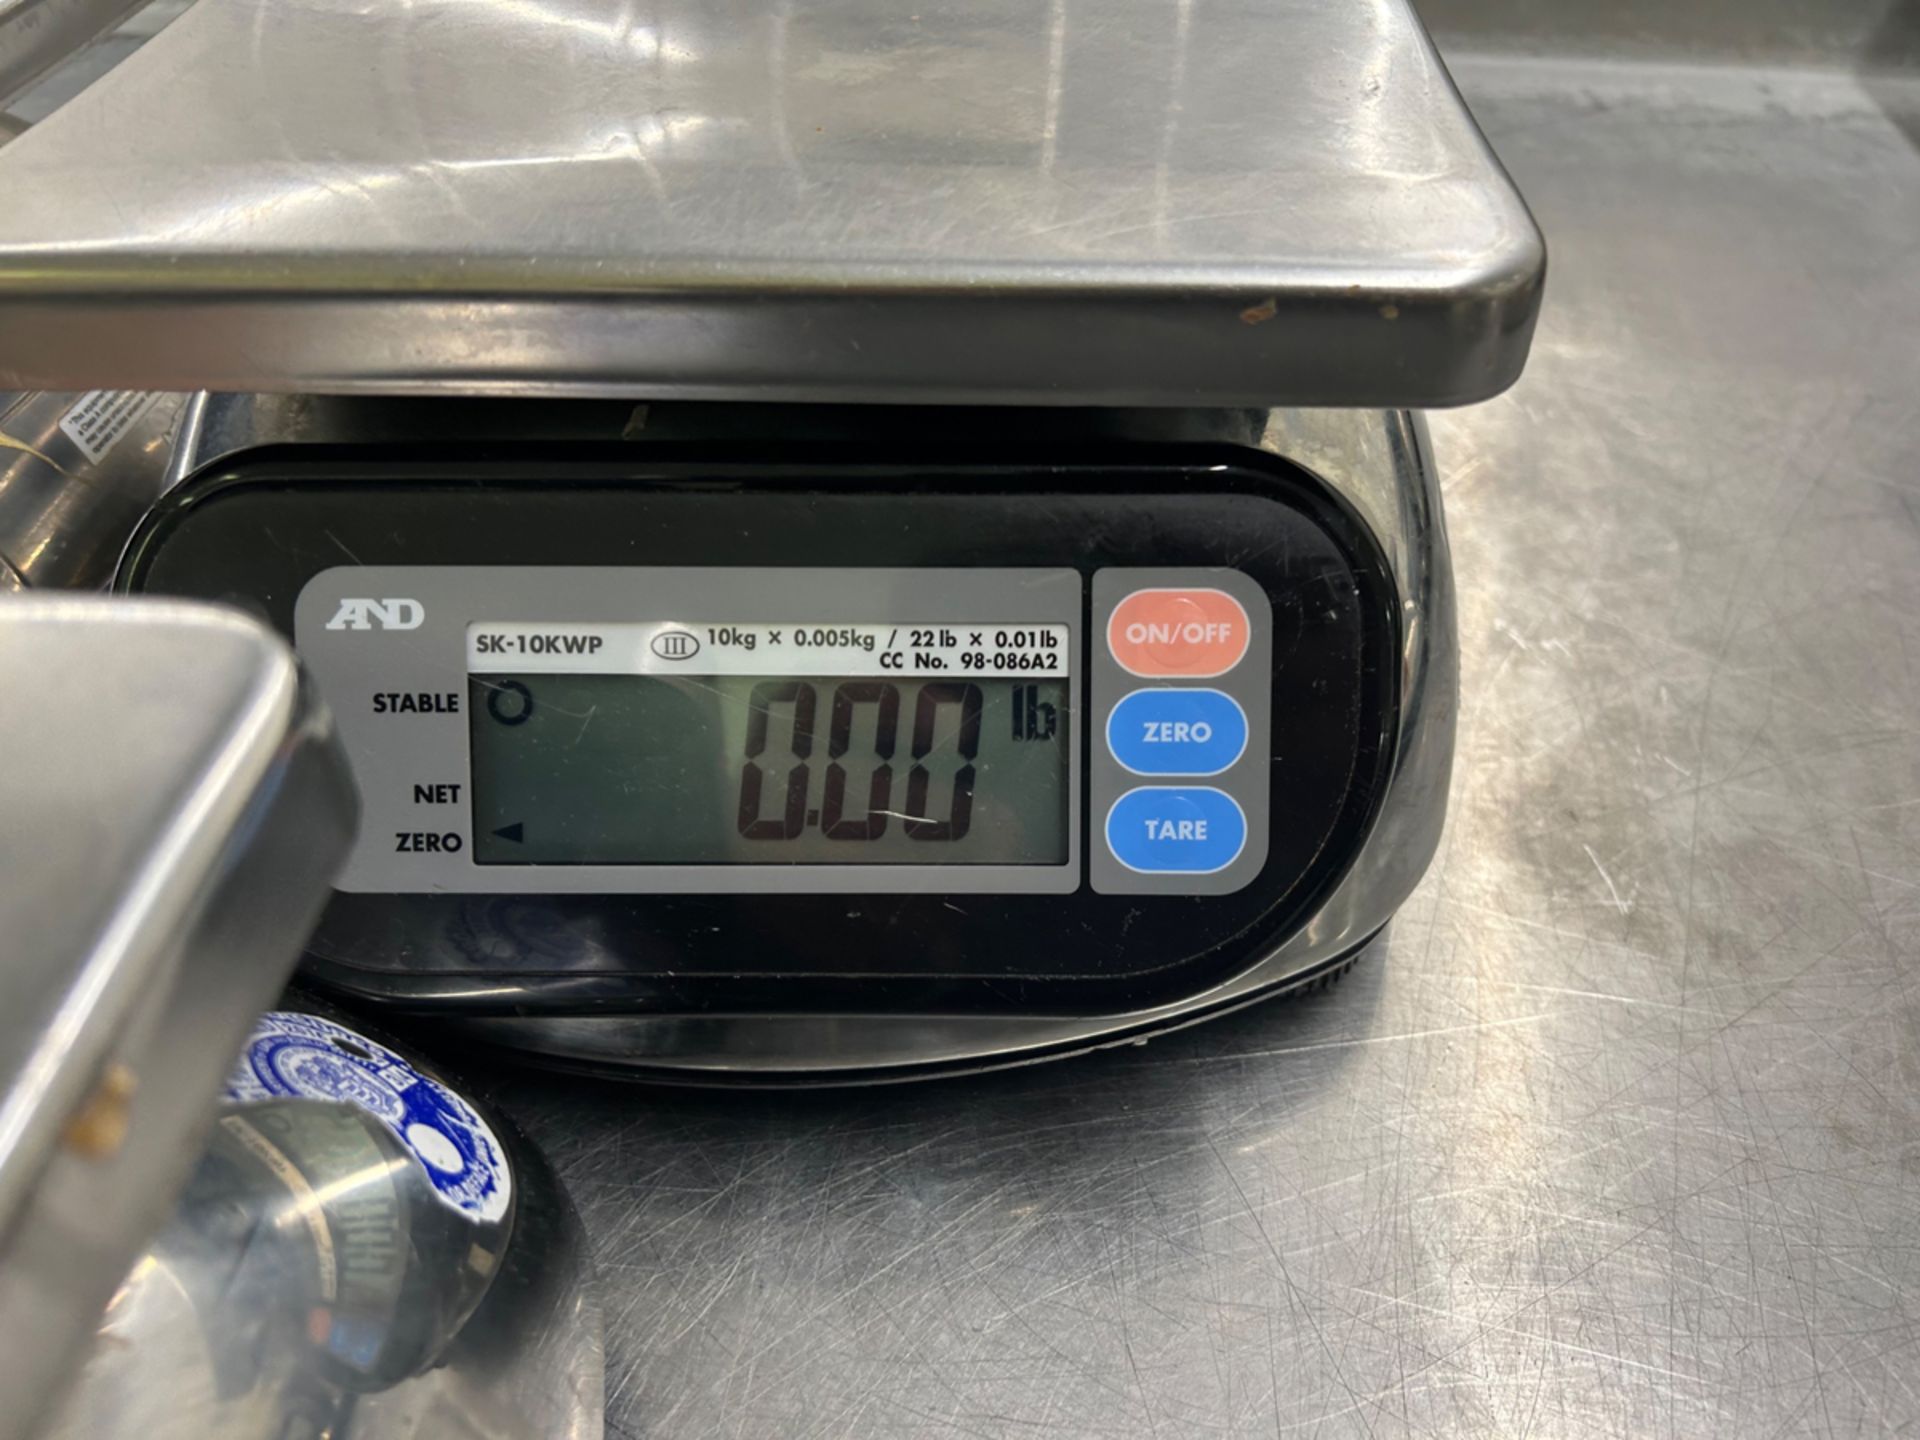 {Each} A&D Weighing A&D SK-20KWP Digital Stainless Steel Washdown Scale - Image 2 of 4